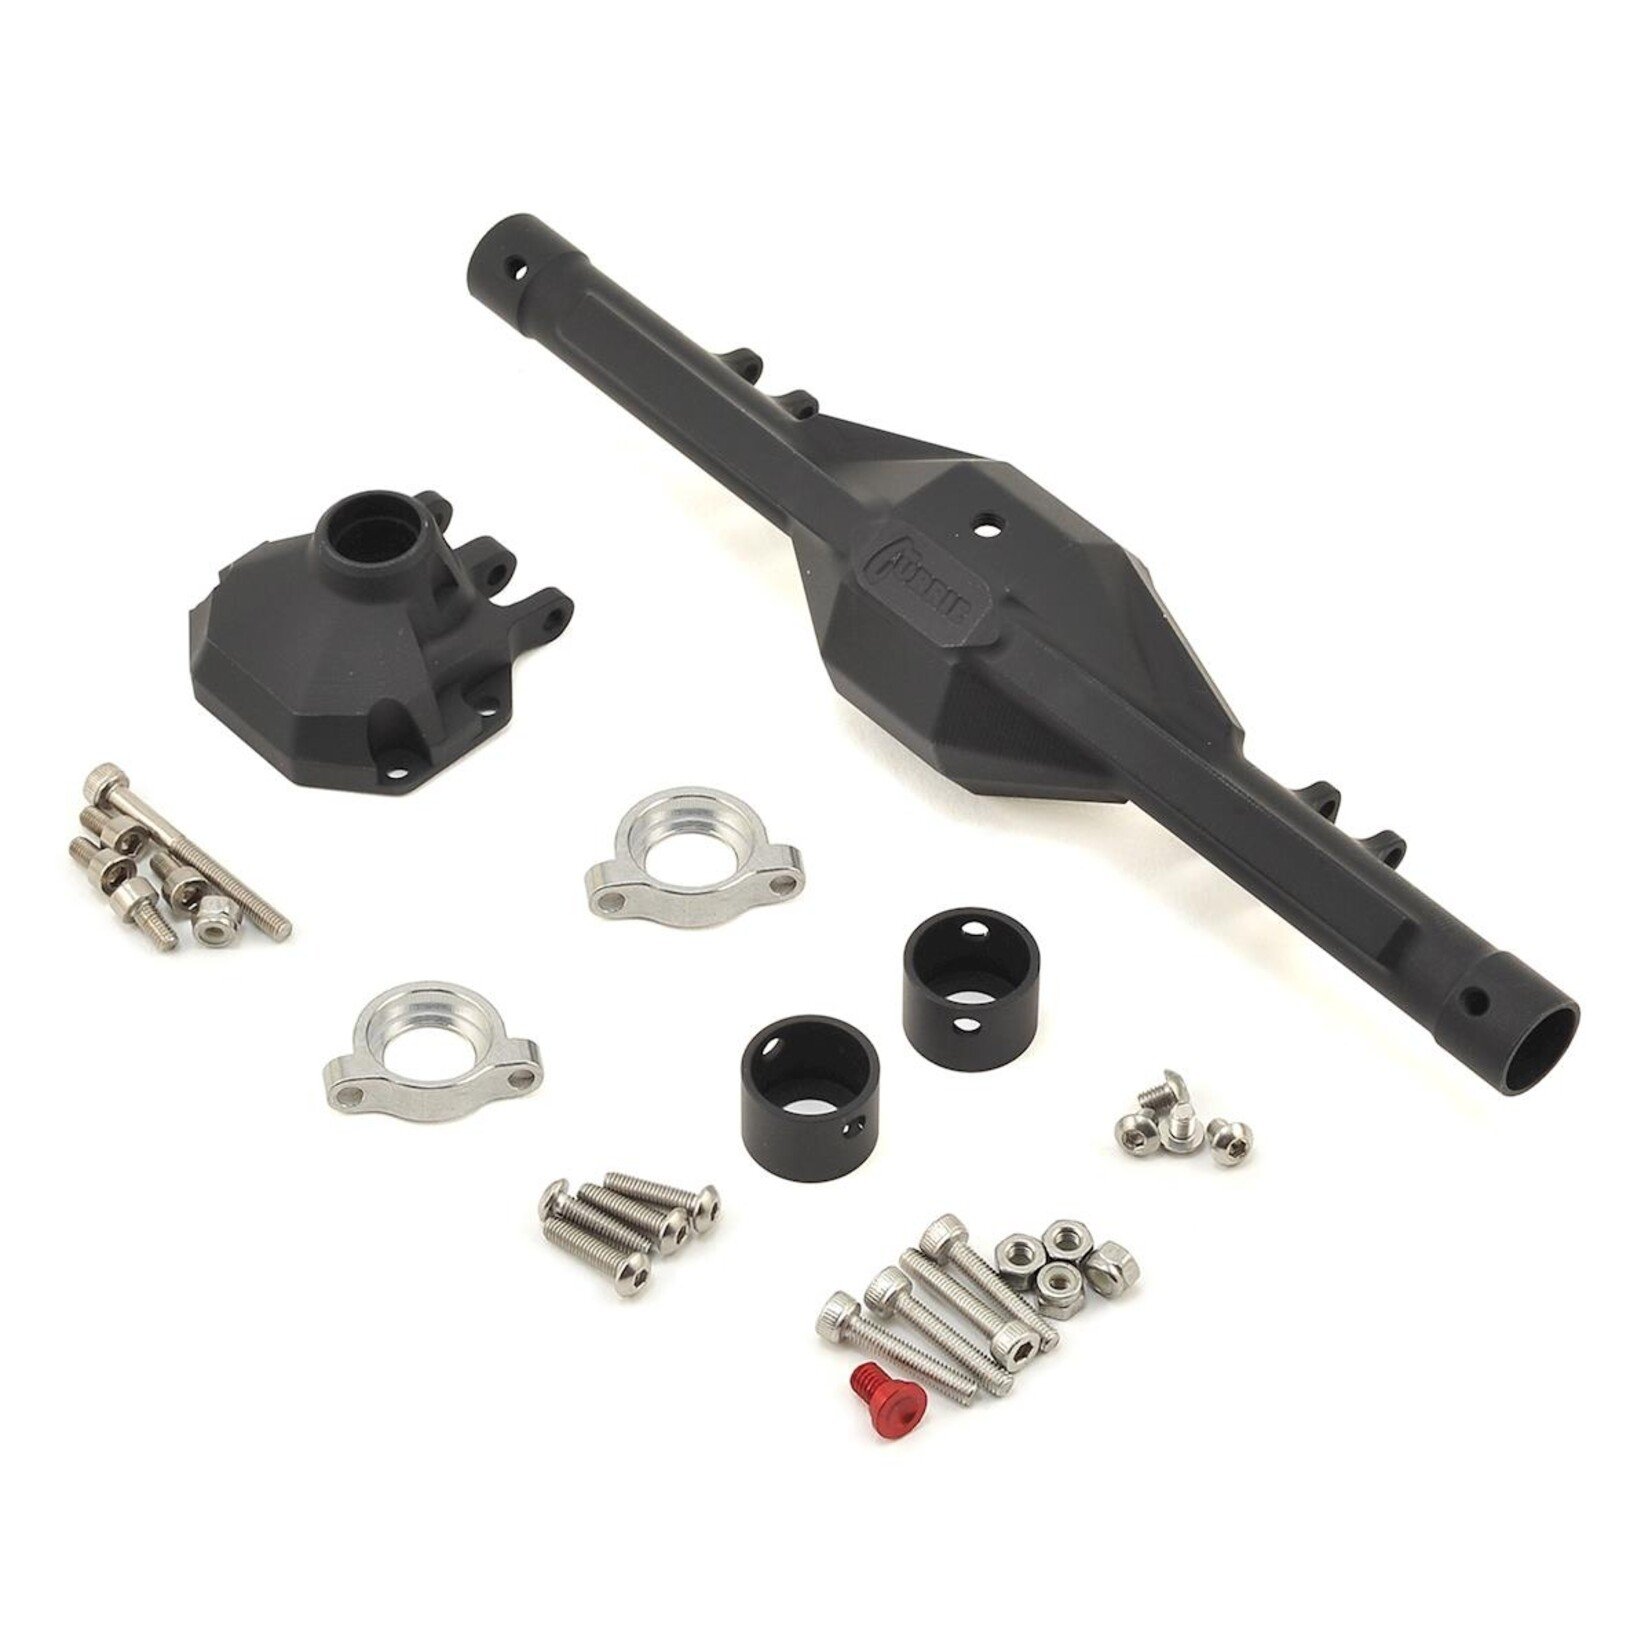 Vanquish Products Vanquish Products Currie F9 SCX10 II Rear Axle (Black) #VPS07851